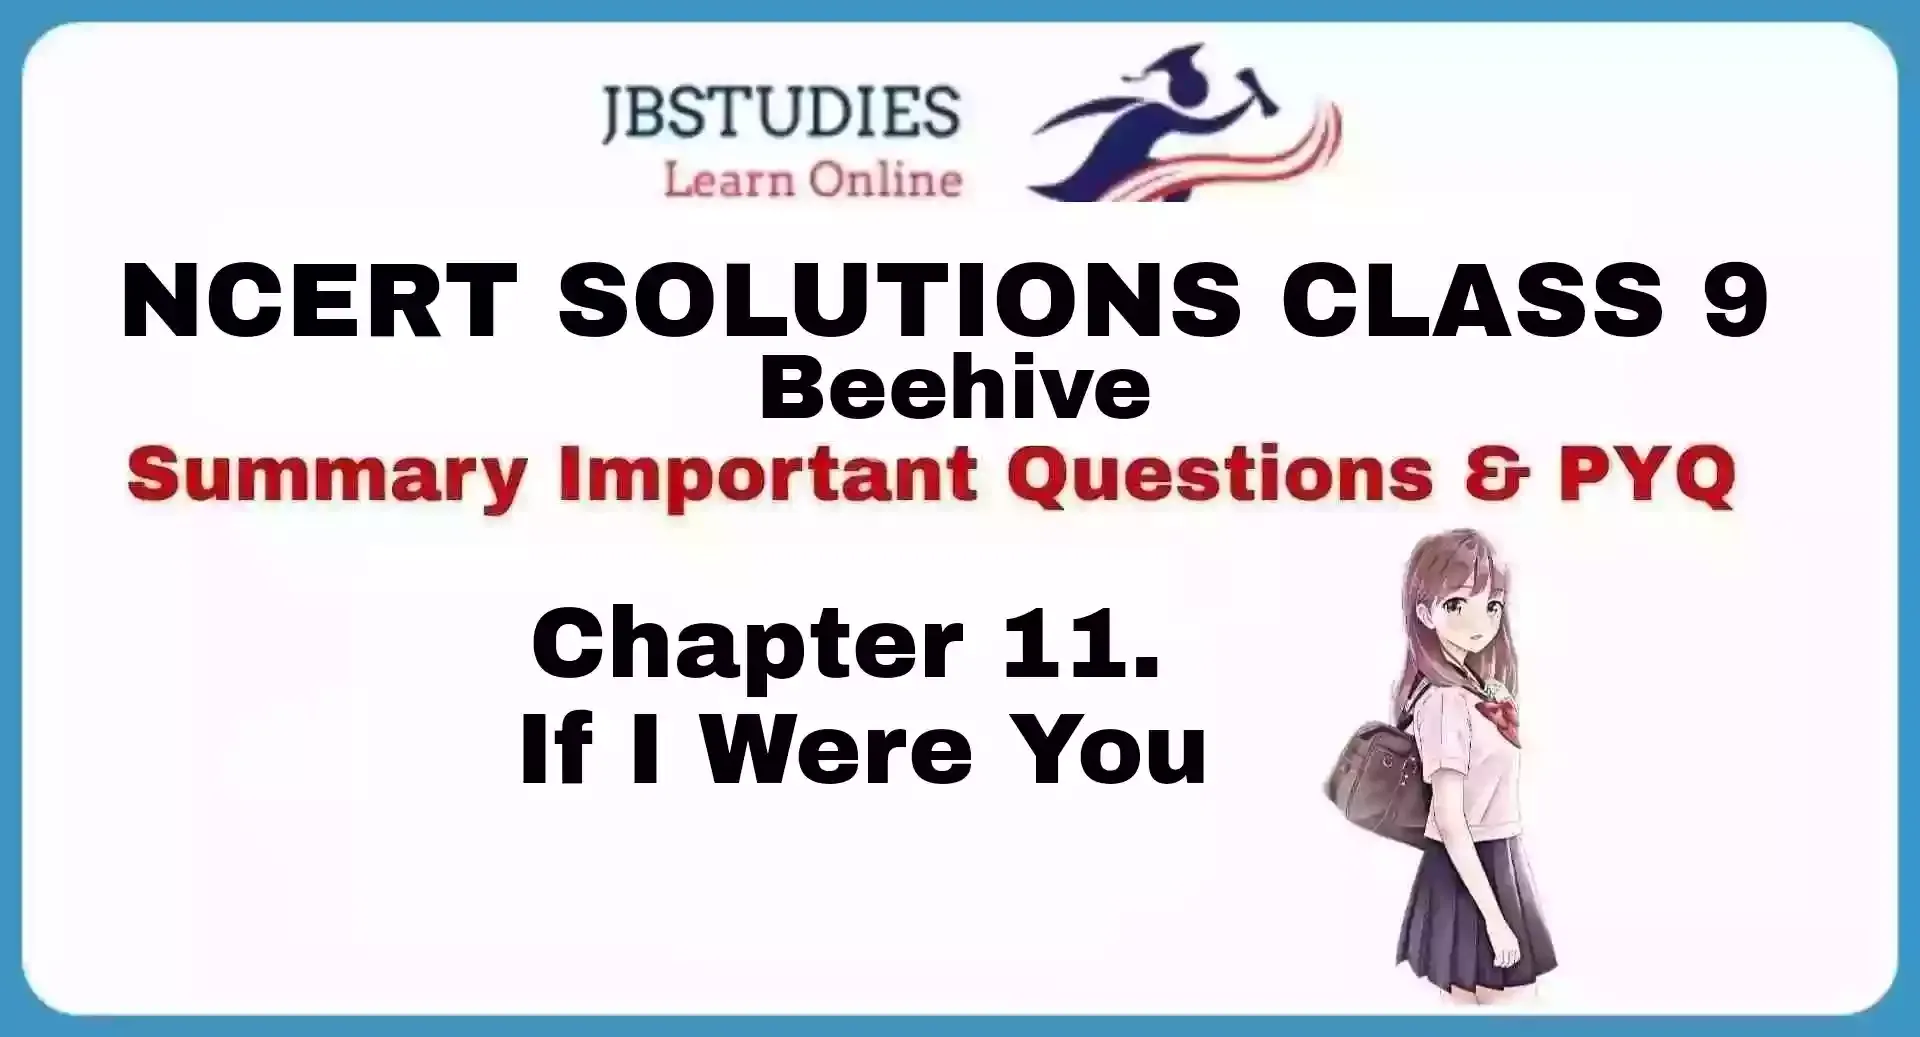 Solutions Class 9 Beehive Chapter-11 (If I Were You)